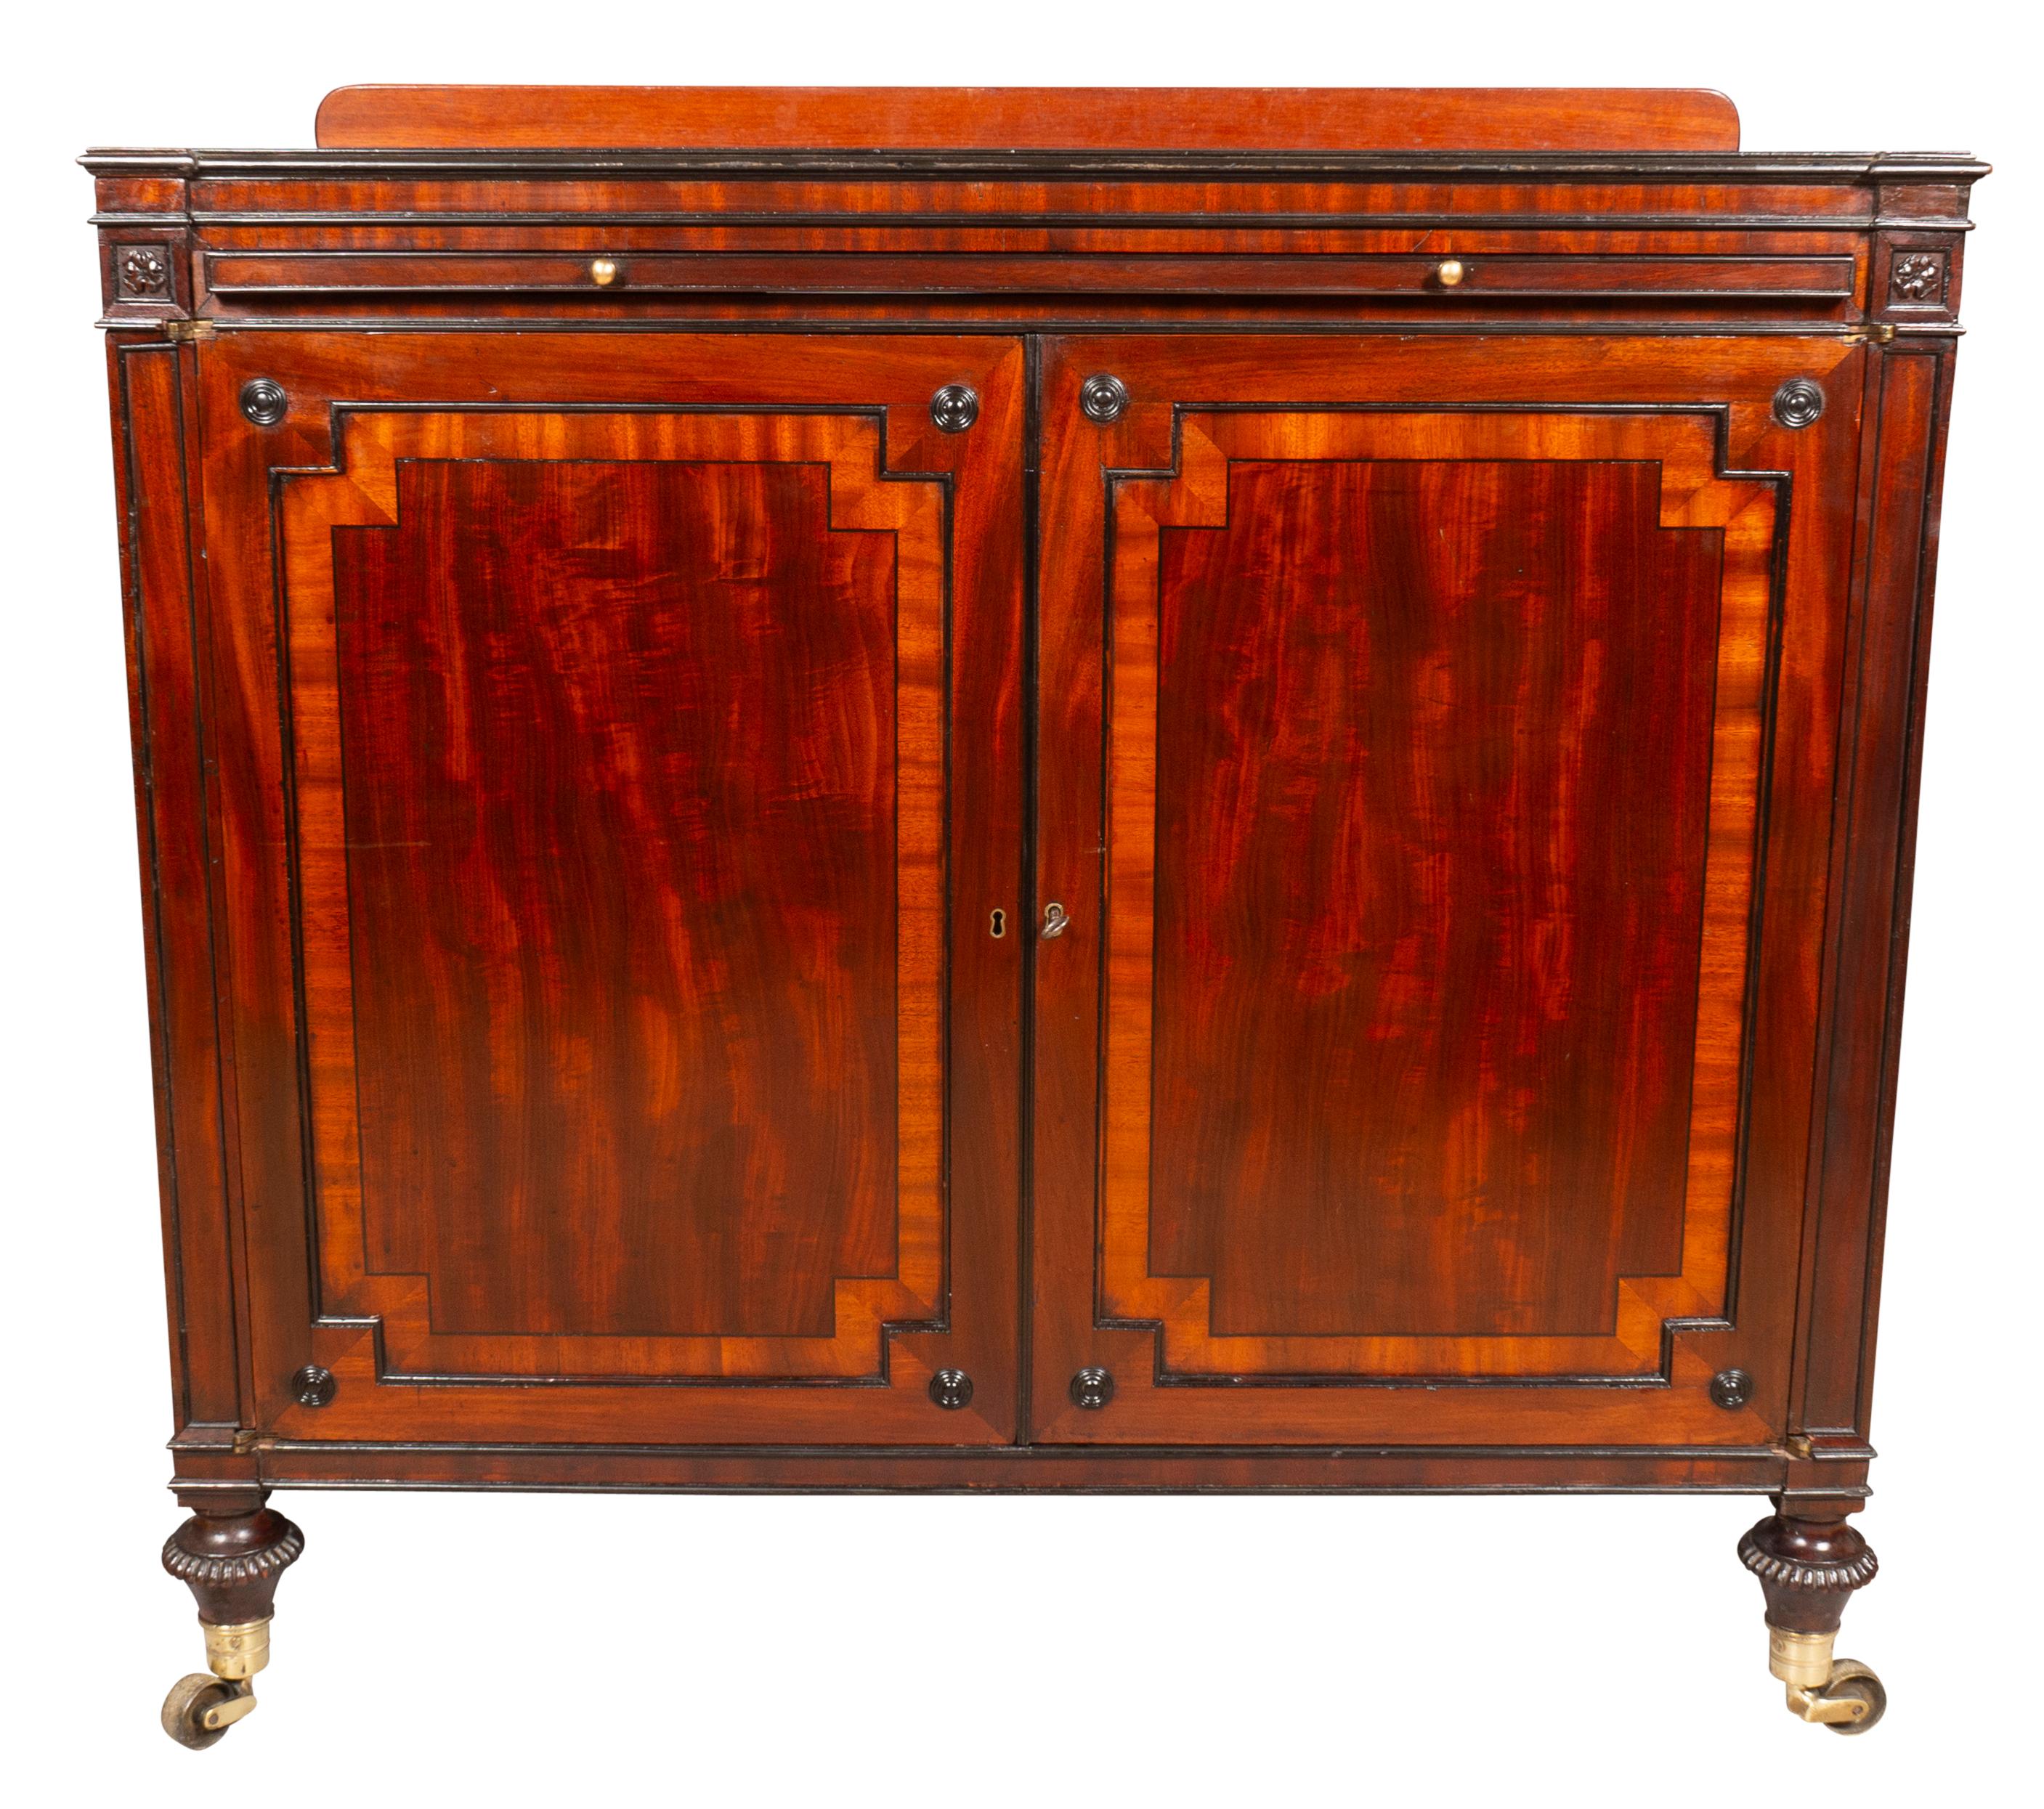 A finely crafted piece with a rectangular top with leather inset and ratcheting book stand over a brushing slide over a pair of paneled doors enclosing sliding tray shelves. The back is finished like front with false doors. Sides have brass ring